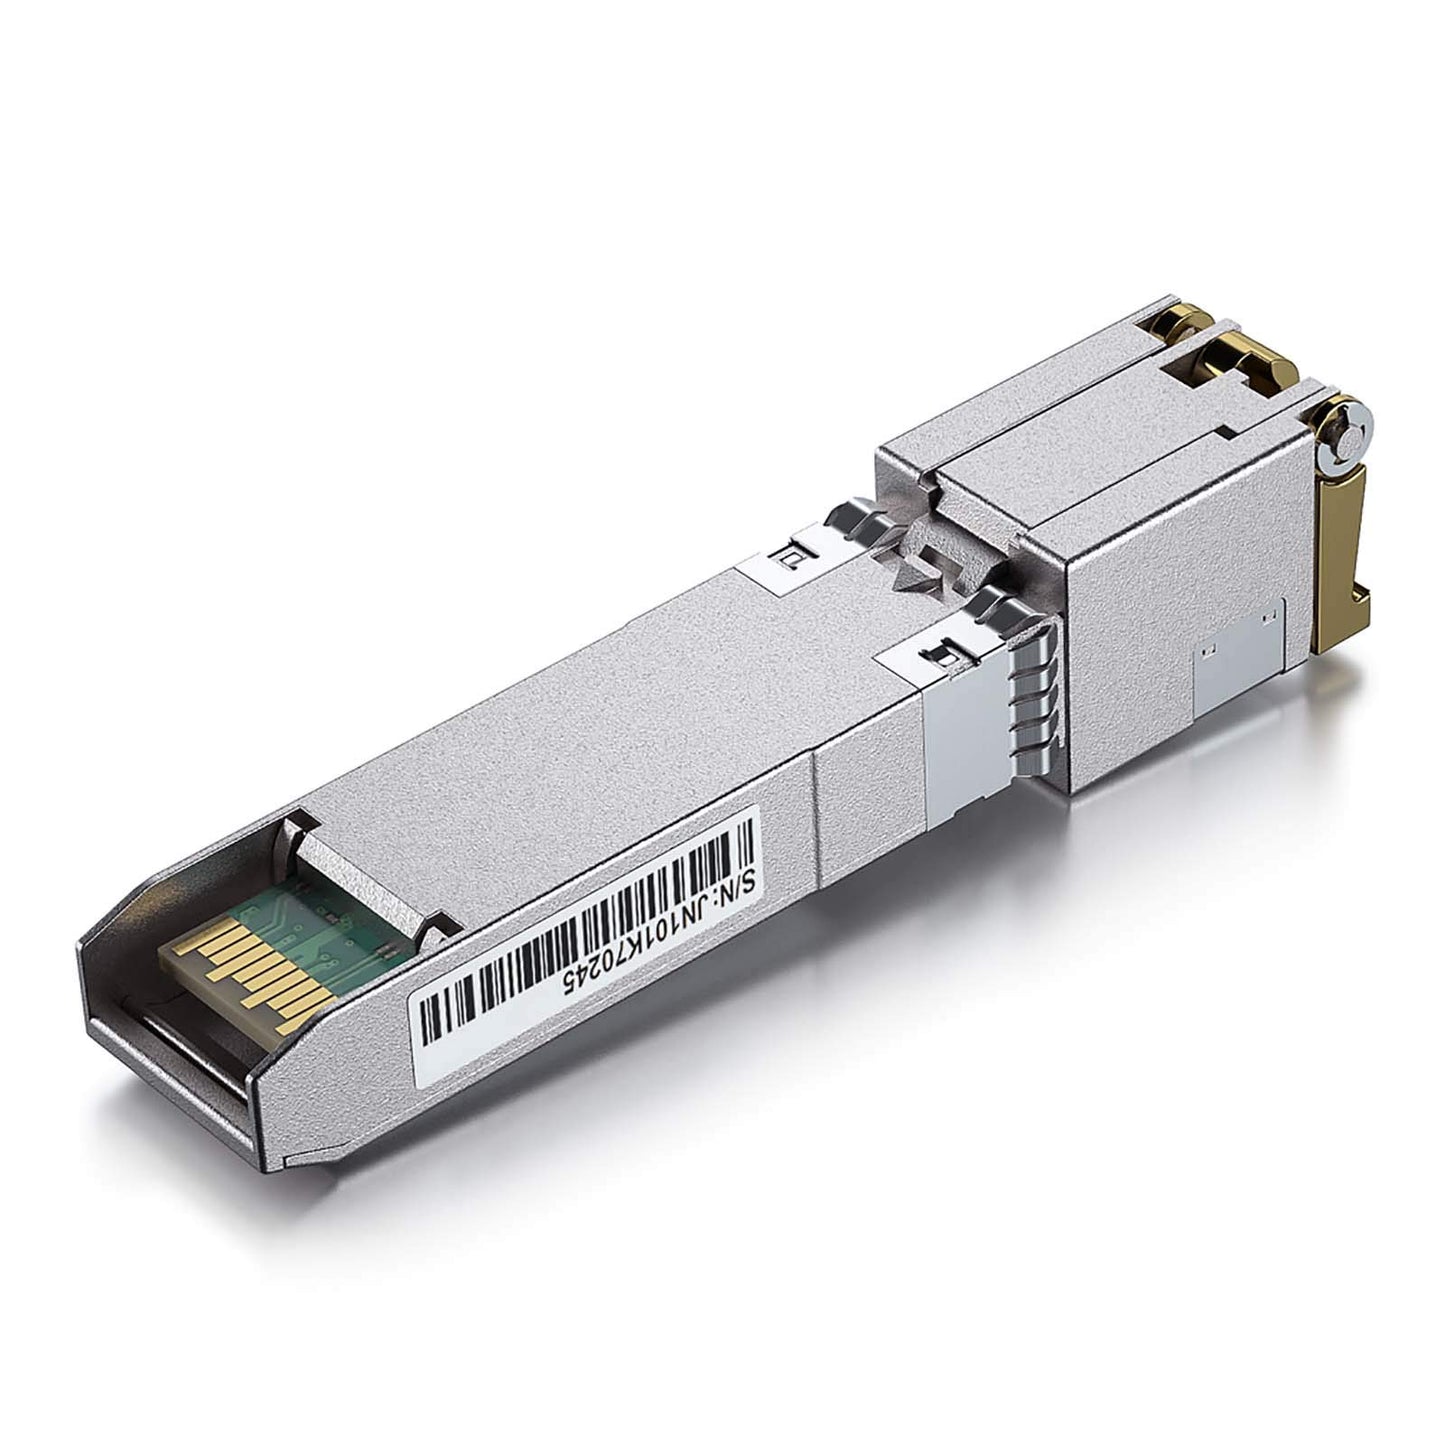 10GBase-T SFP+ Transceiver, 10G T, 10G Copper, RJ-45 SFP+ CAT.6a, up to 30 meters, Compatible with Cisco SFP-10G-T-S, 10 Pack